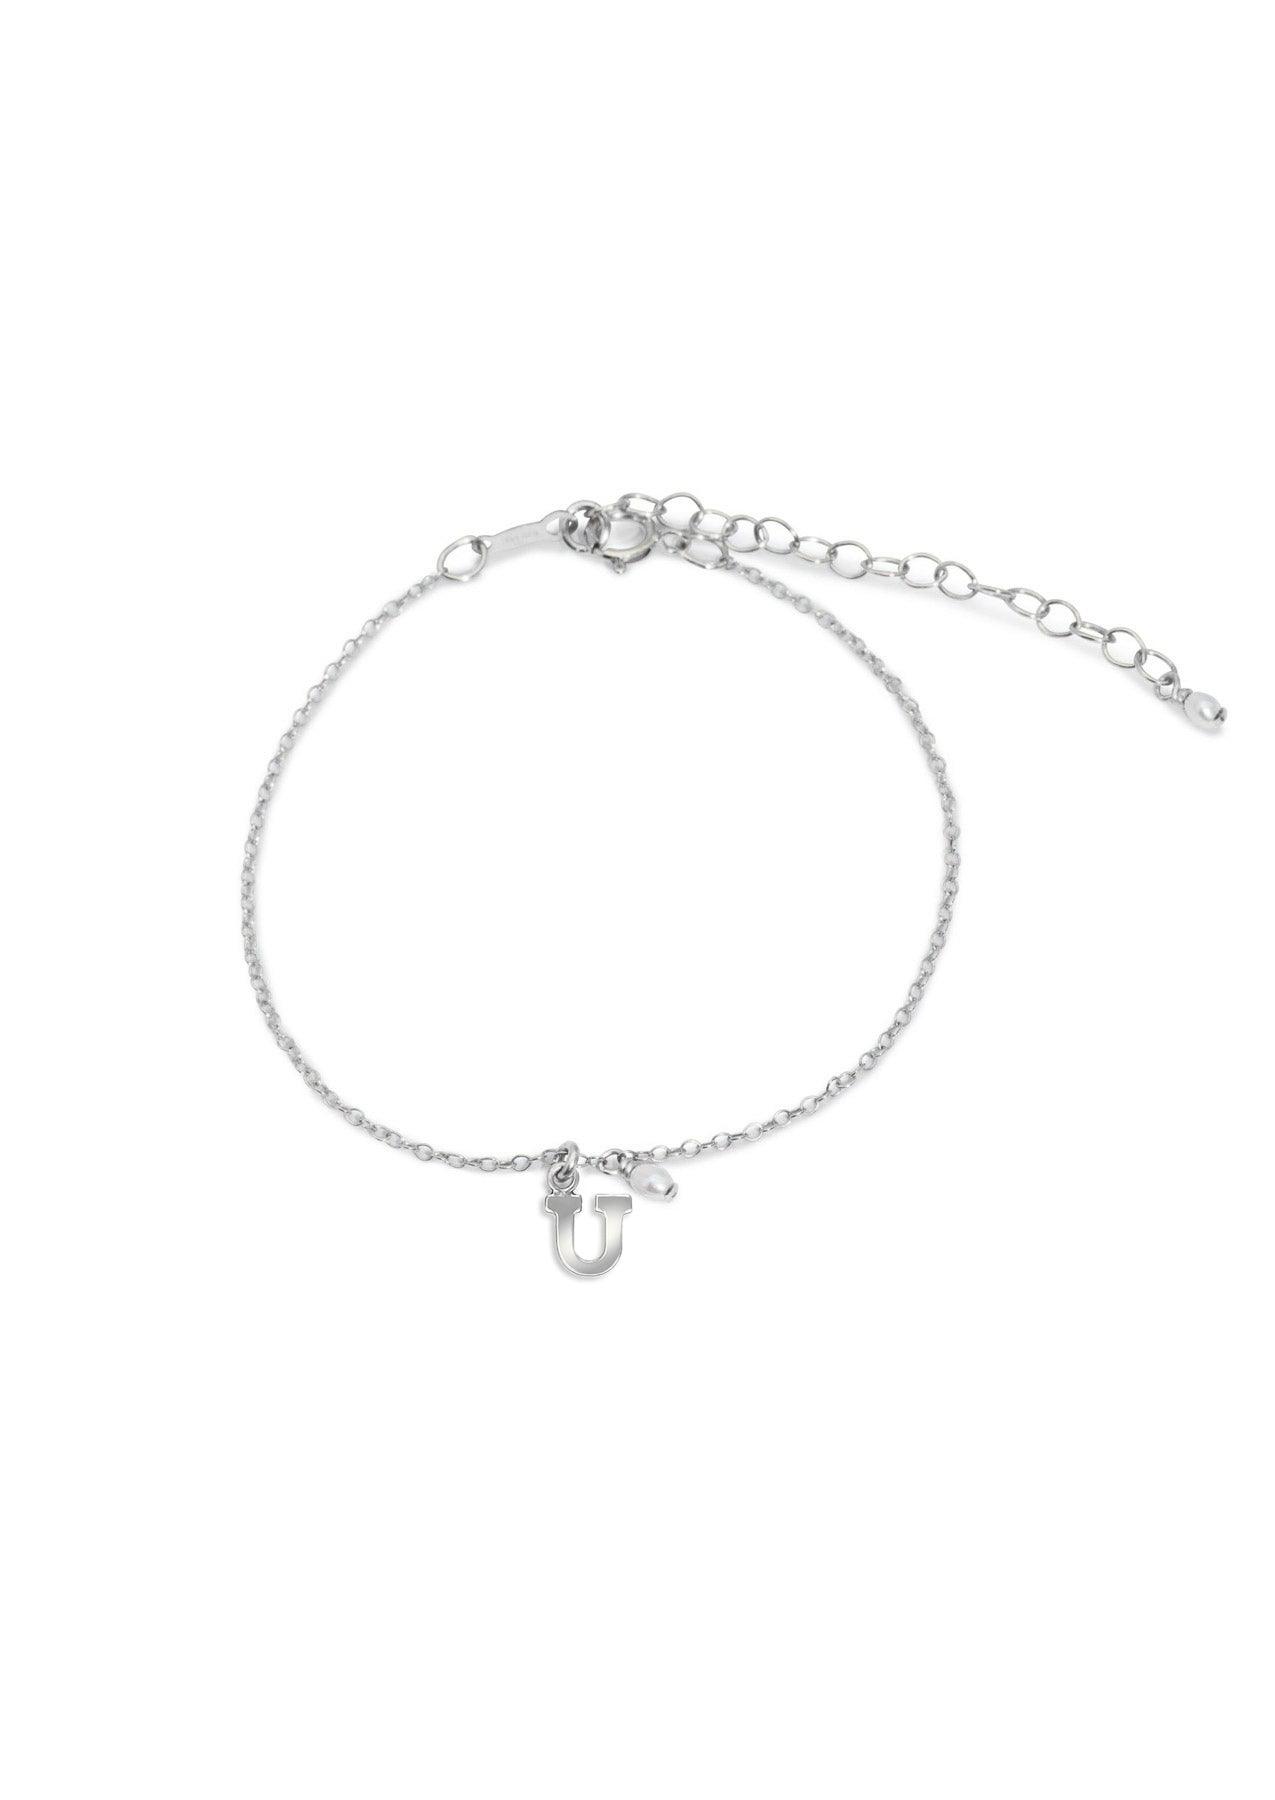 The Silver Initial Charm Bracelet